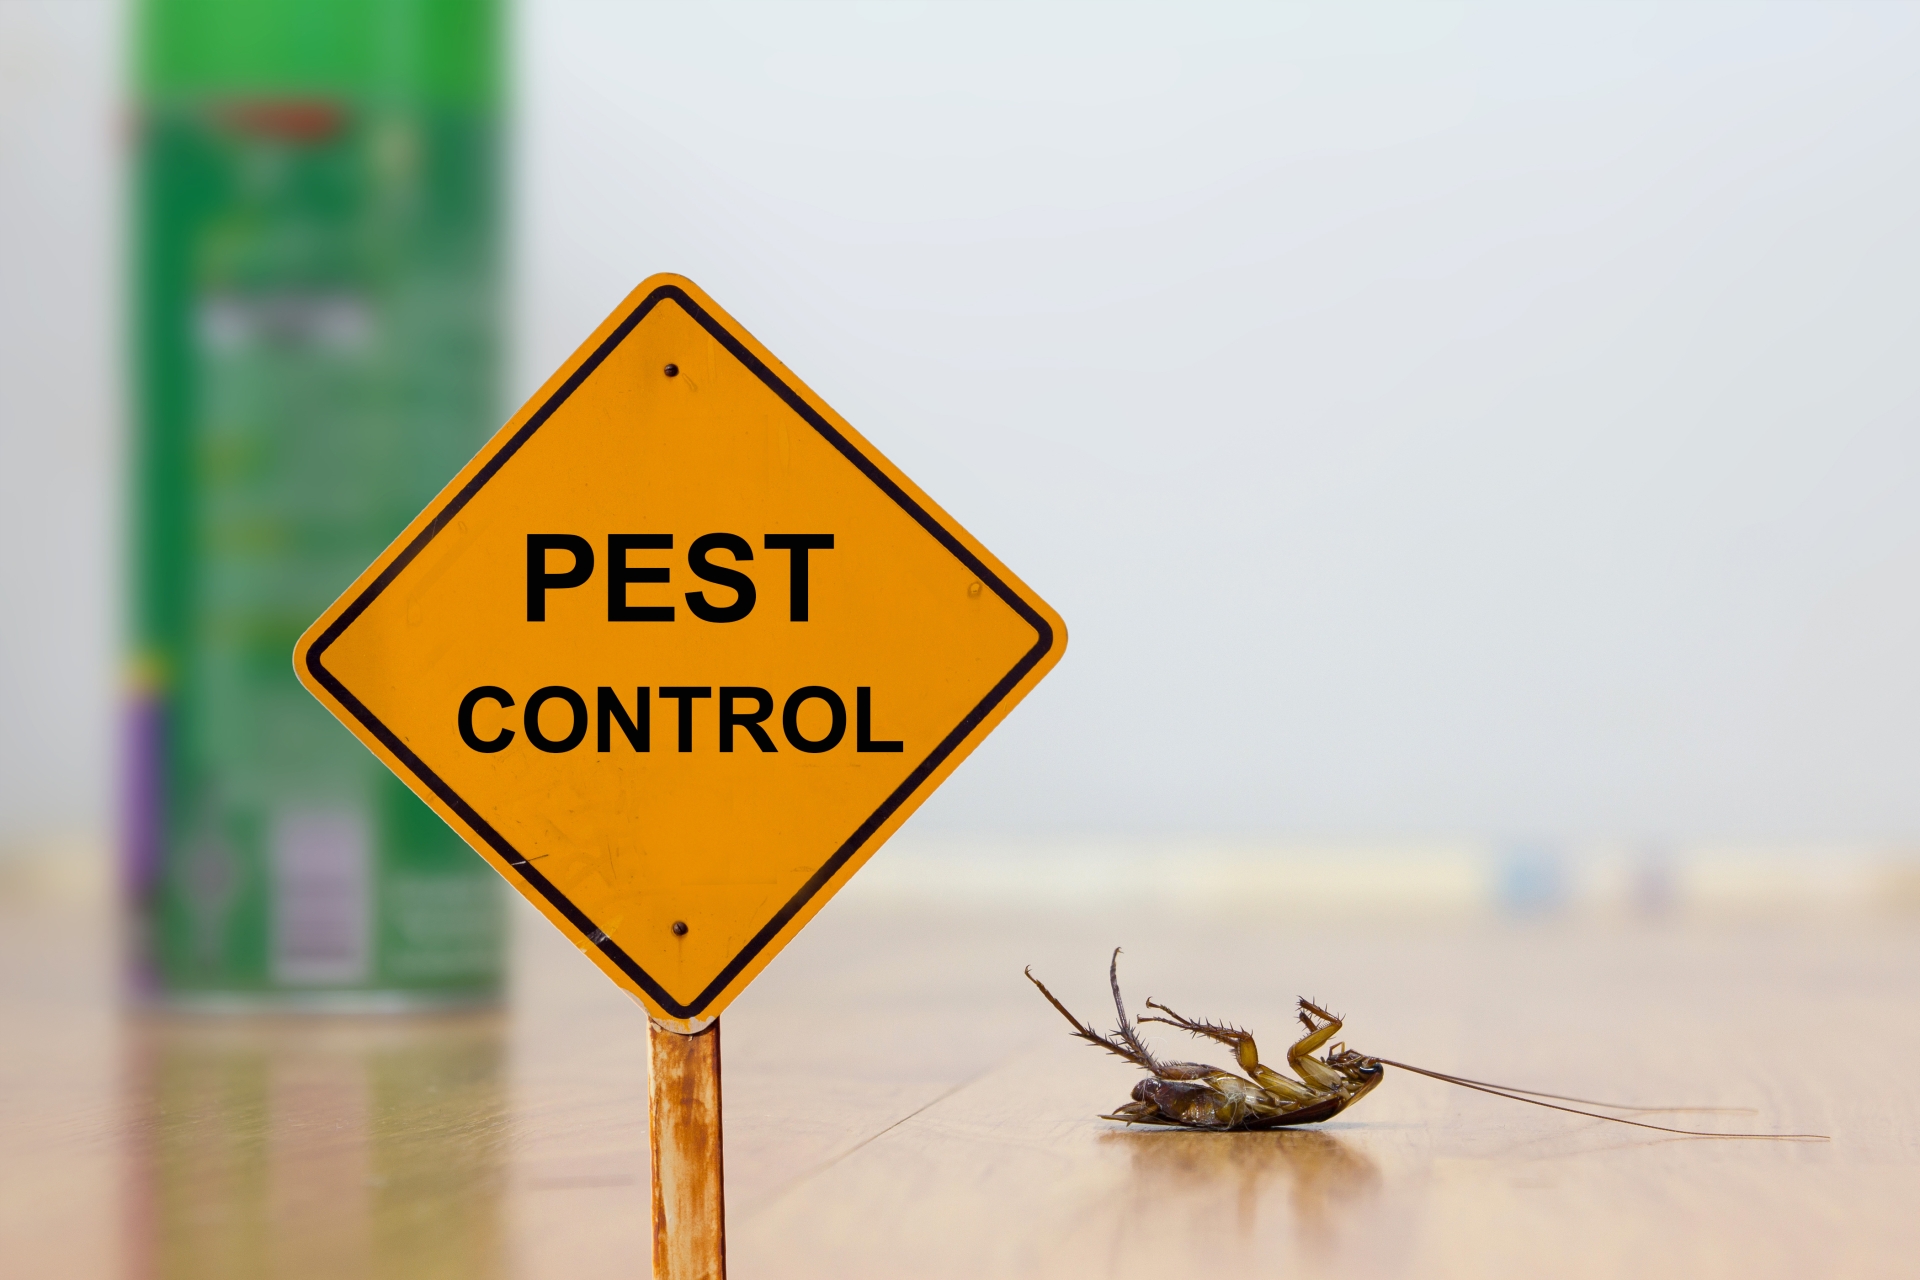 24 Hour Pest Control, Pest Control in Tottenham, N17. Call Now 020 8166 9746